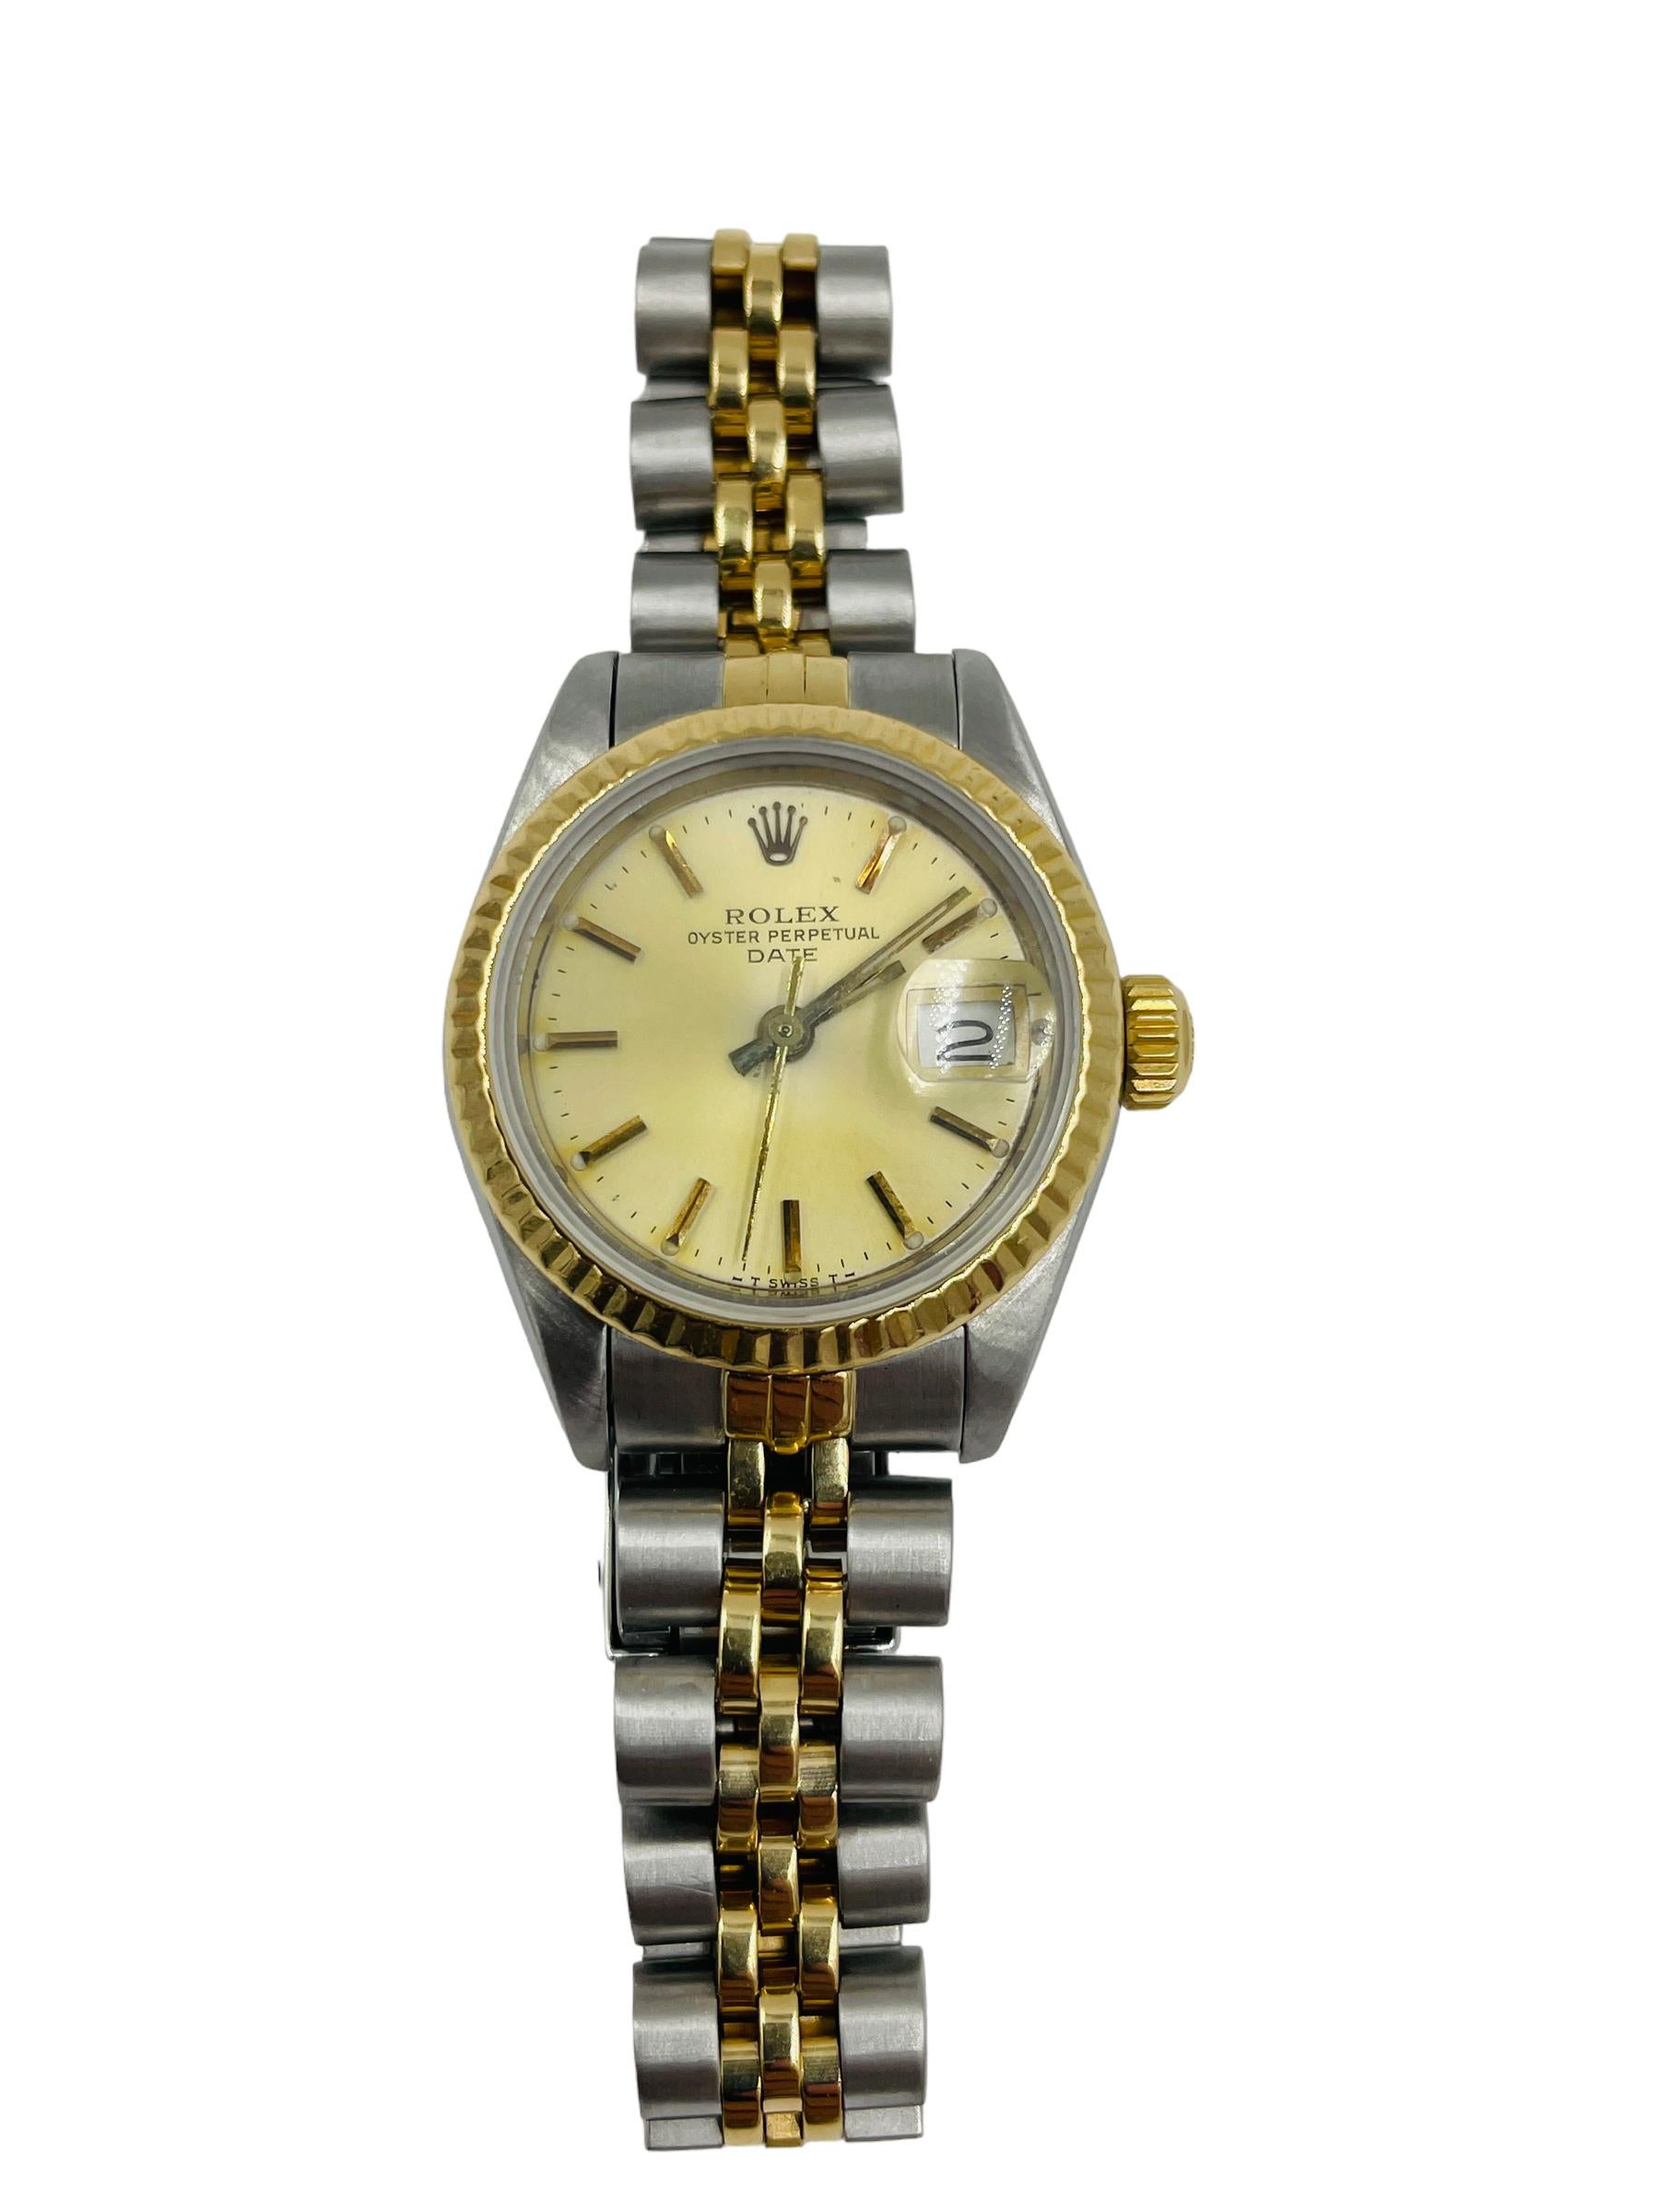 Ladies 2tone yellow gold and stainless steel Rolex date wristwatch, circa 1984.

DESCRIPTION:  Rolex Date 18k yellow gold and stainless steel 26 mm women's wristwatch,  circa 1984, reference            
# 69173.  It has light superficial scratches